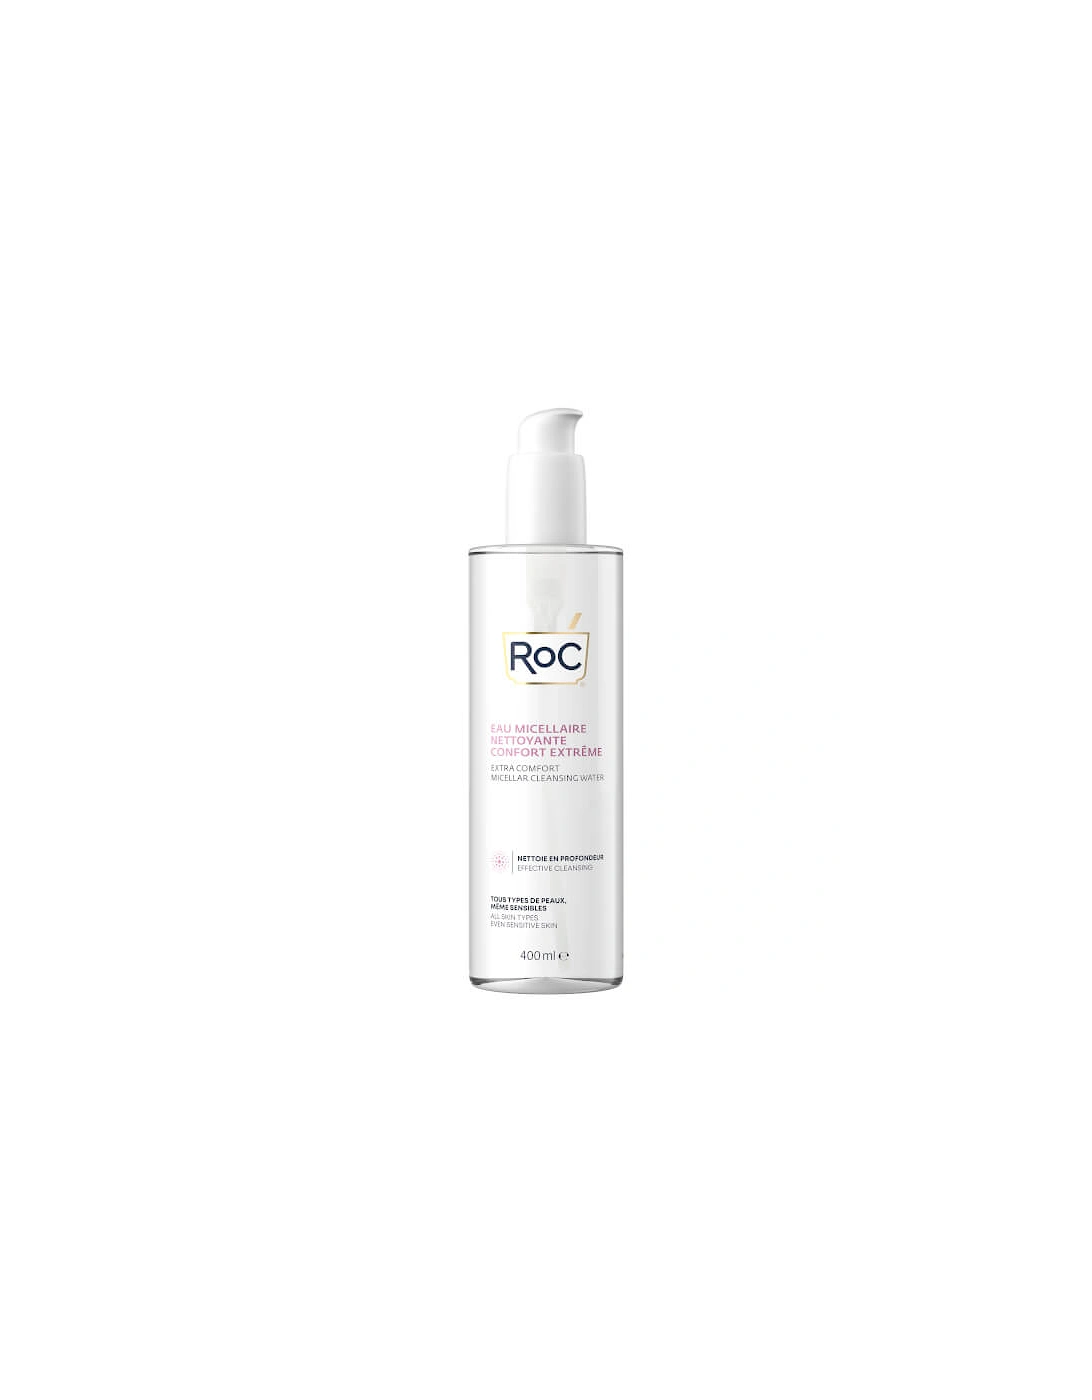 RoC Extra Comfort Micellar Cleansing Water 400ml, 2 of 1